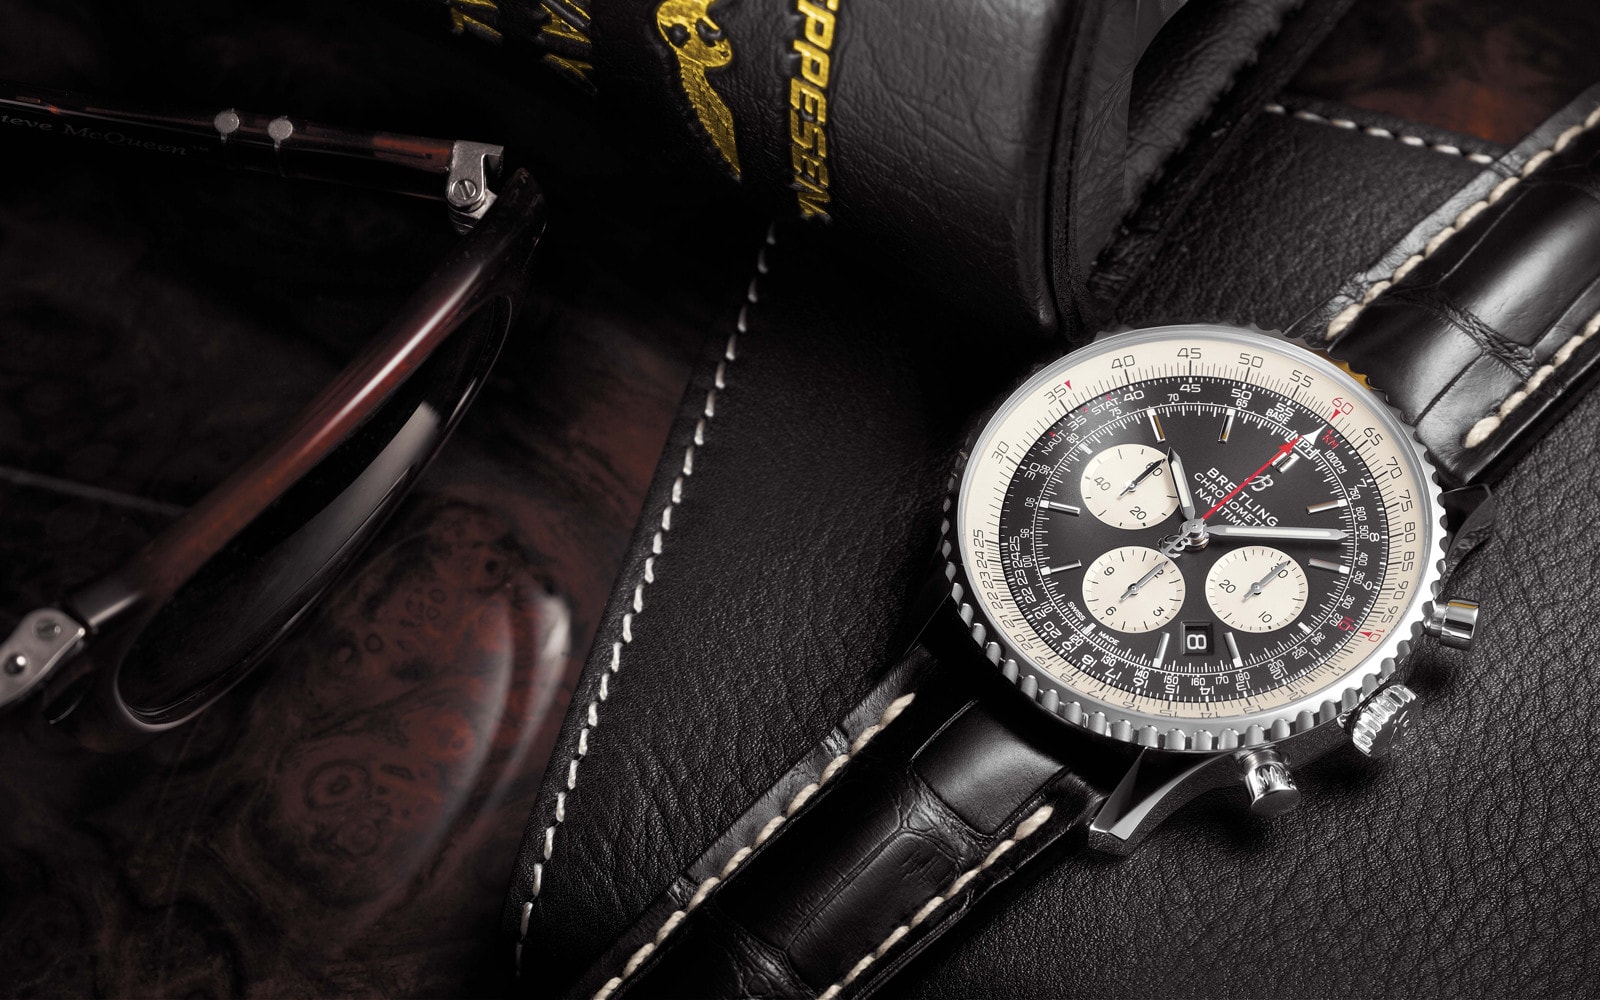 Breitling Navitimer on a leather background